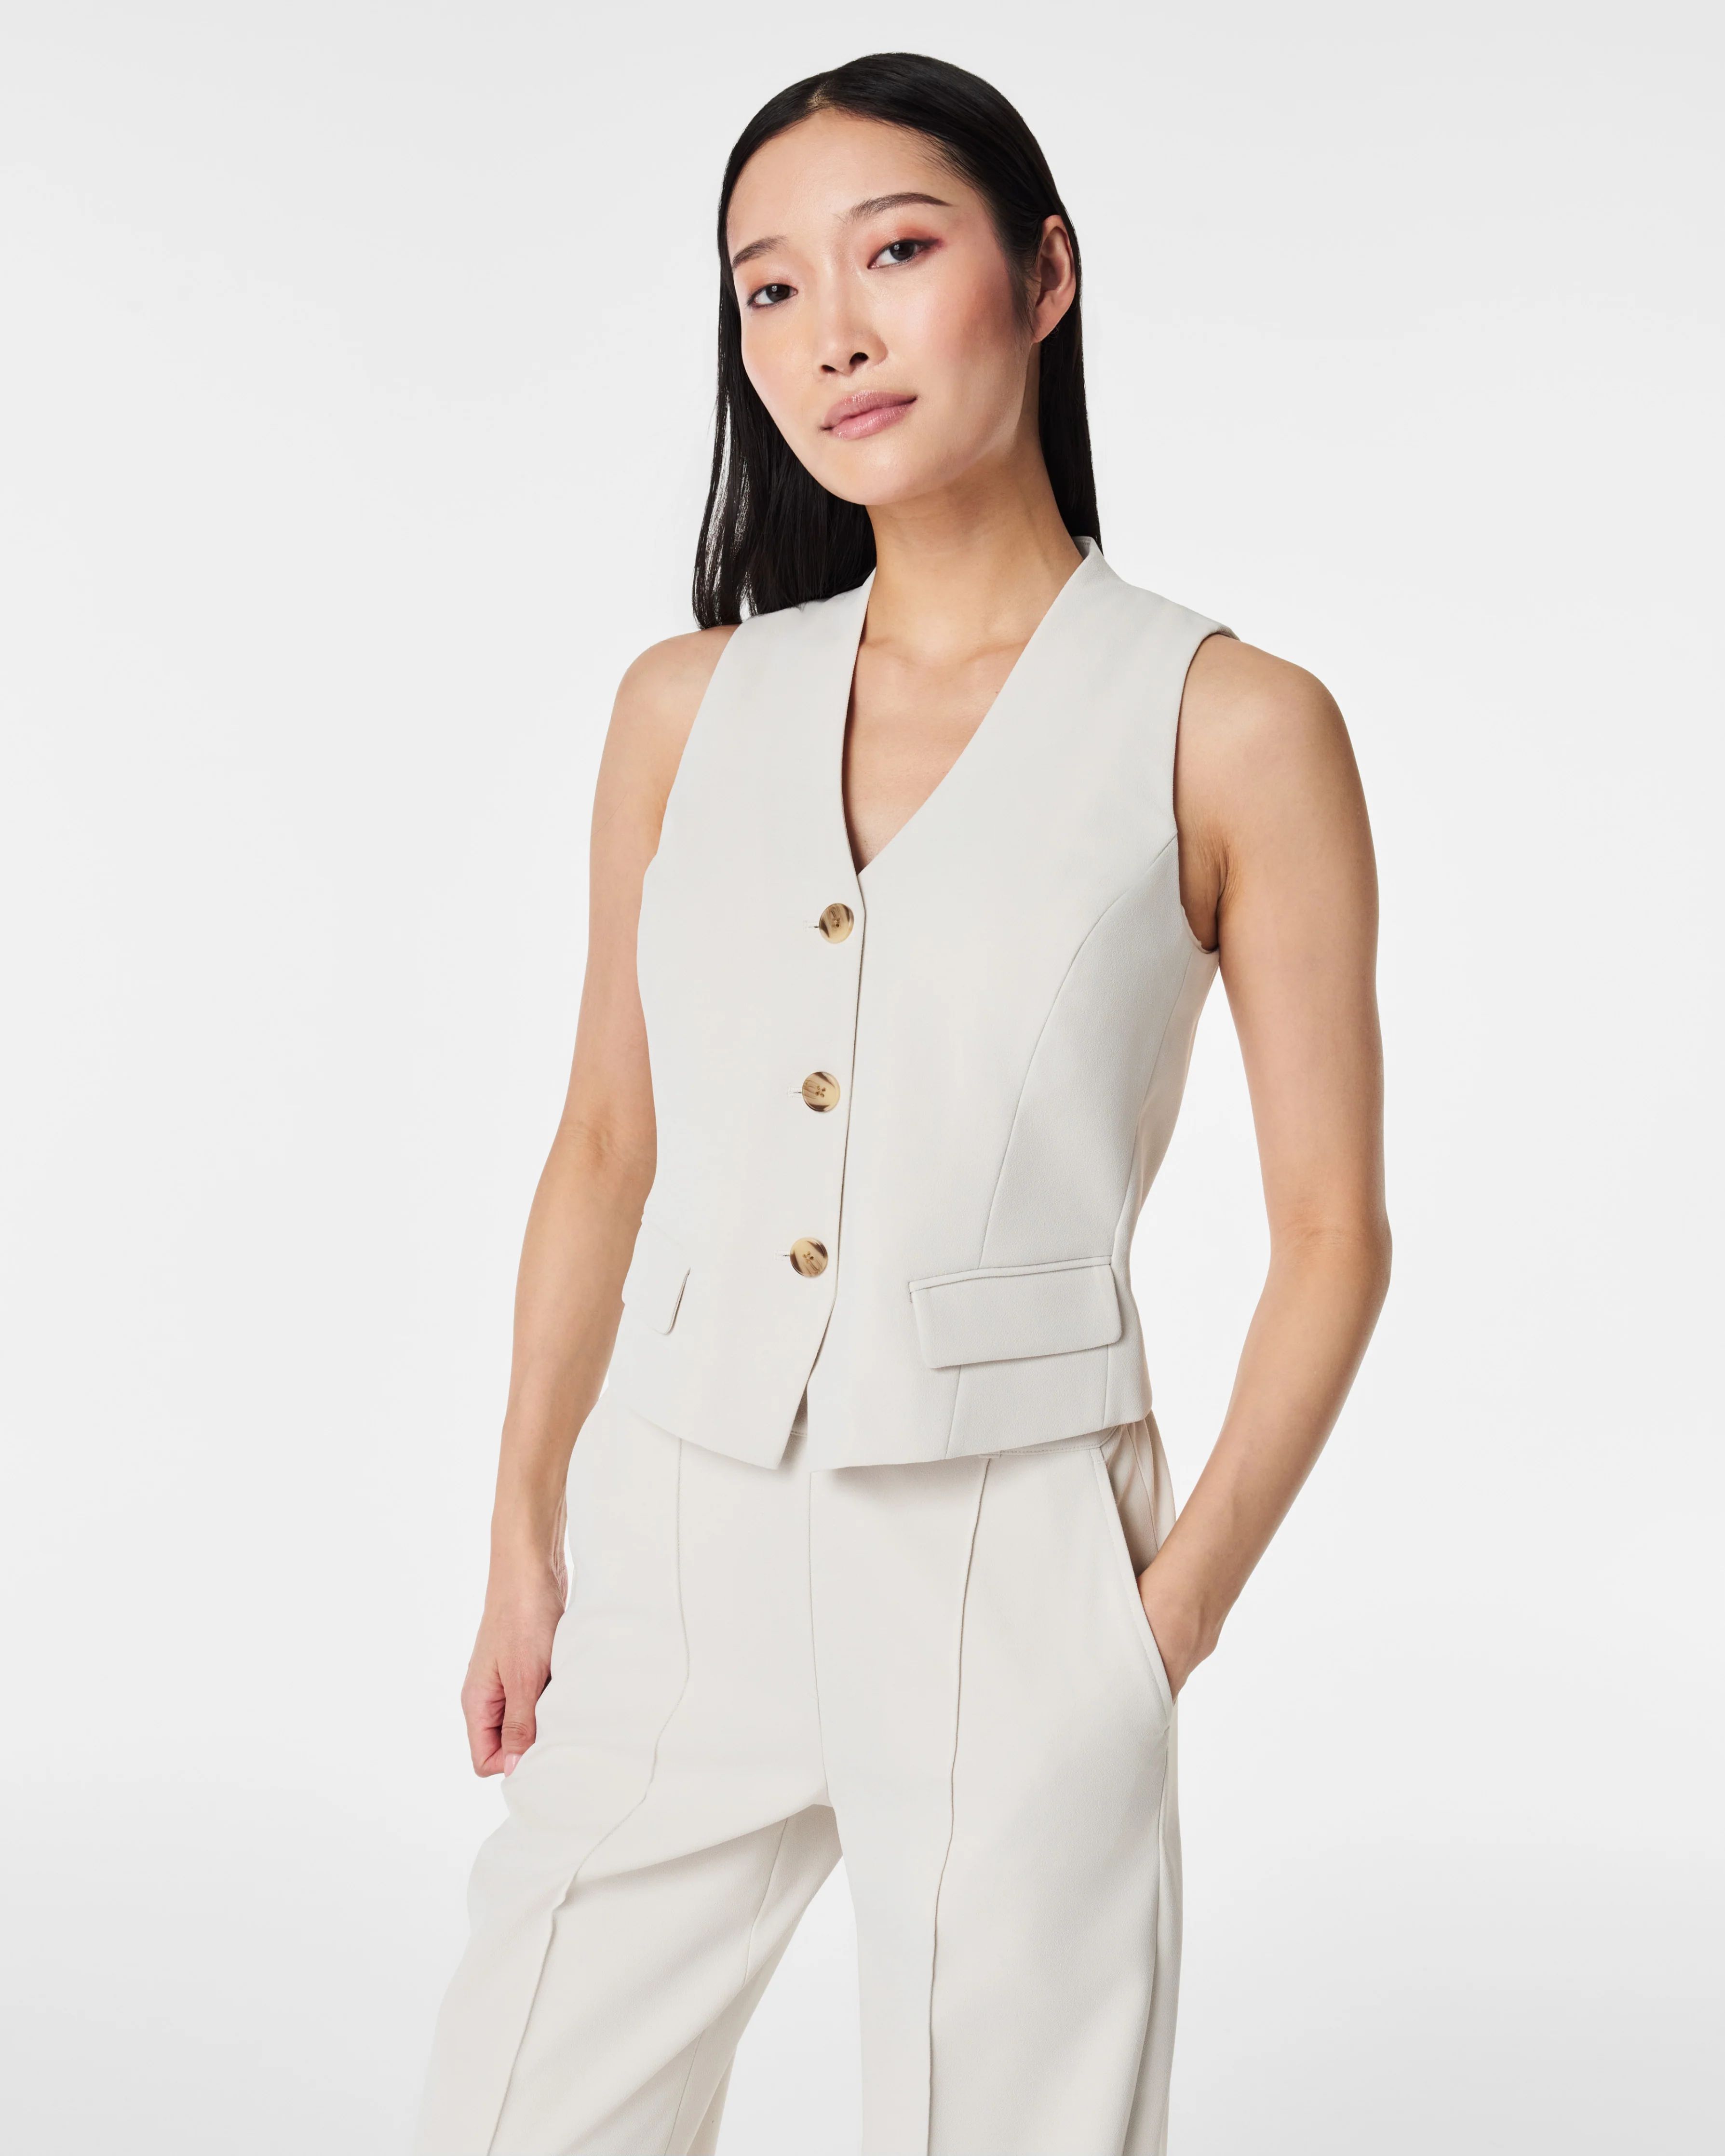 Carefree Crepe Vest Top With No-Show Coverage | Spanx